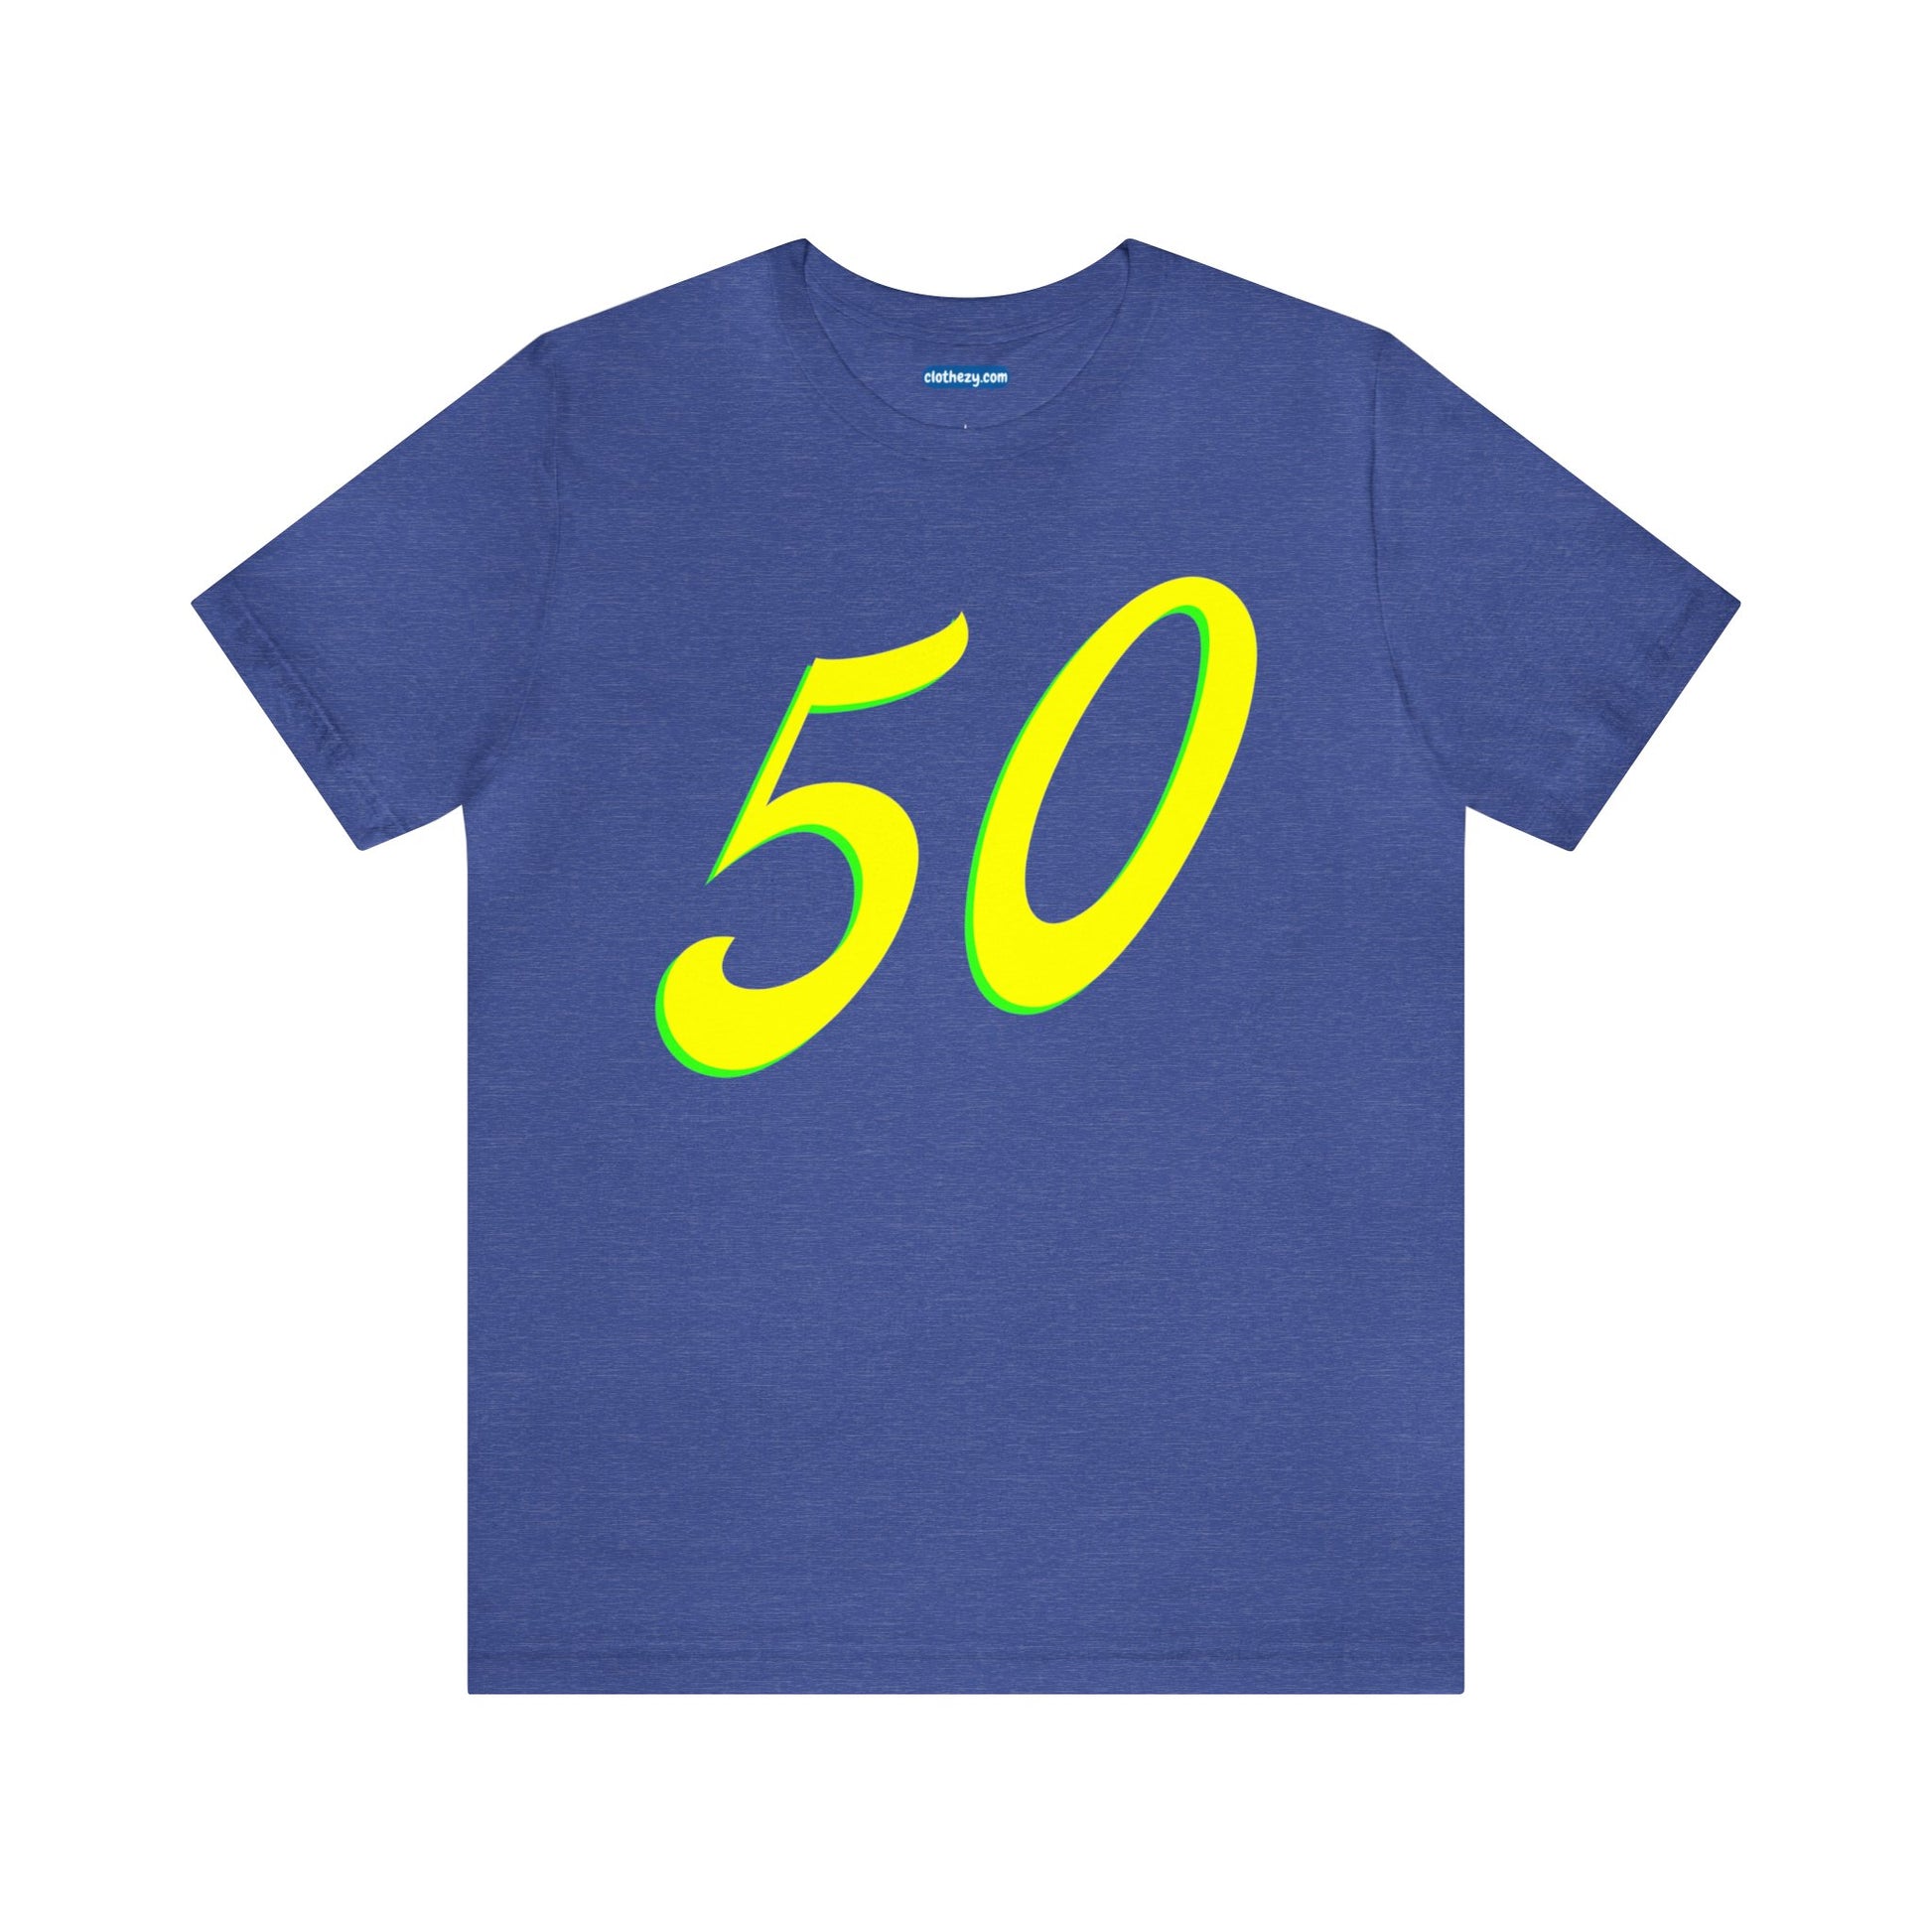 Number 50 Design - Soft Cotton Tee for birthdays and celebrations, Gift for friends and family, Multiple Options by clothezy.com in Royal Blue Heather Size Small - Buy Now